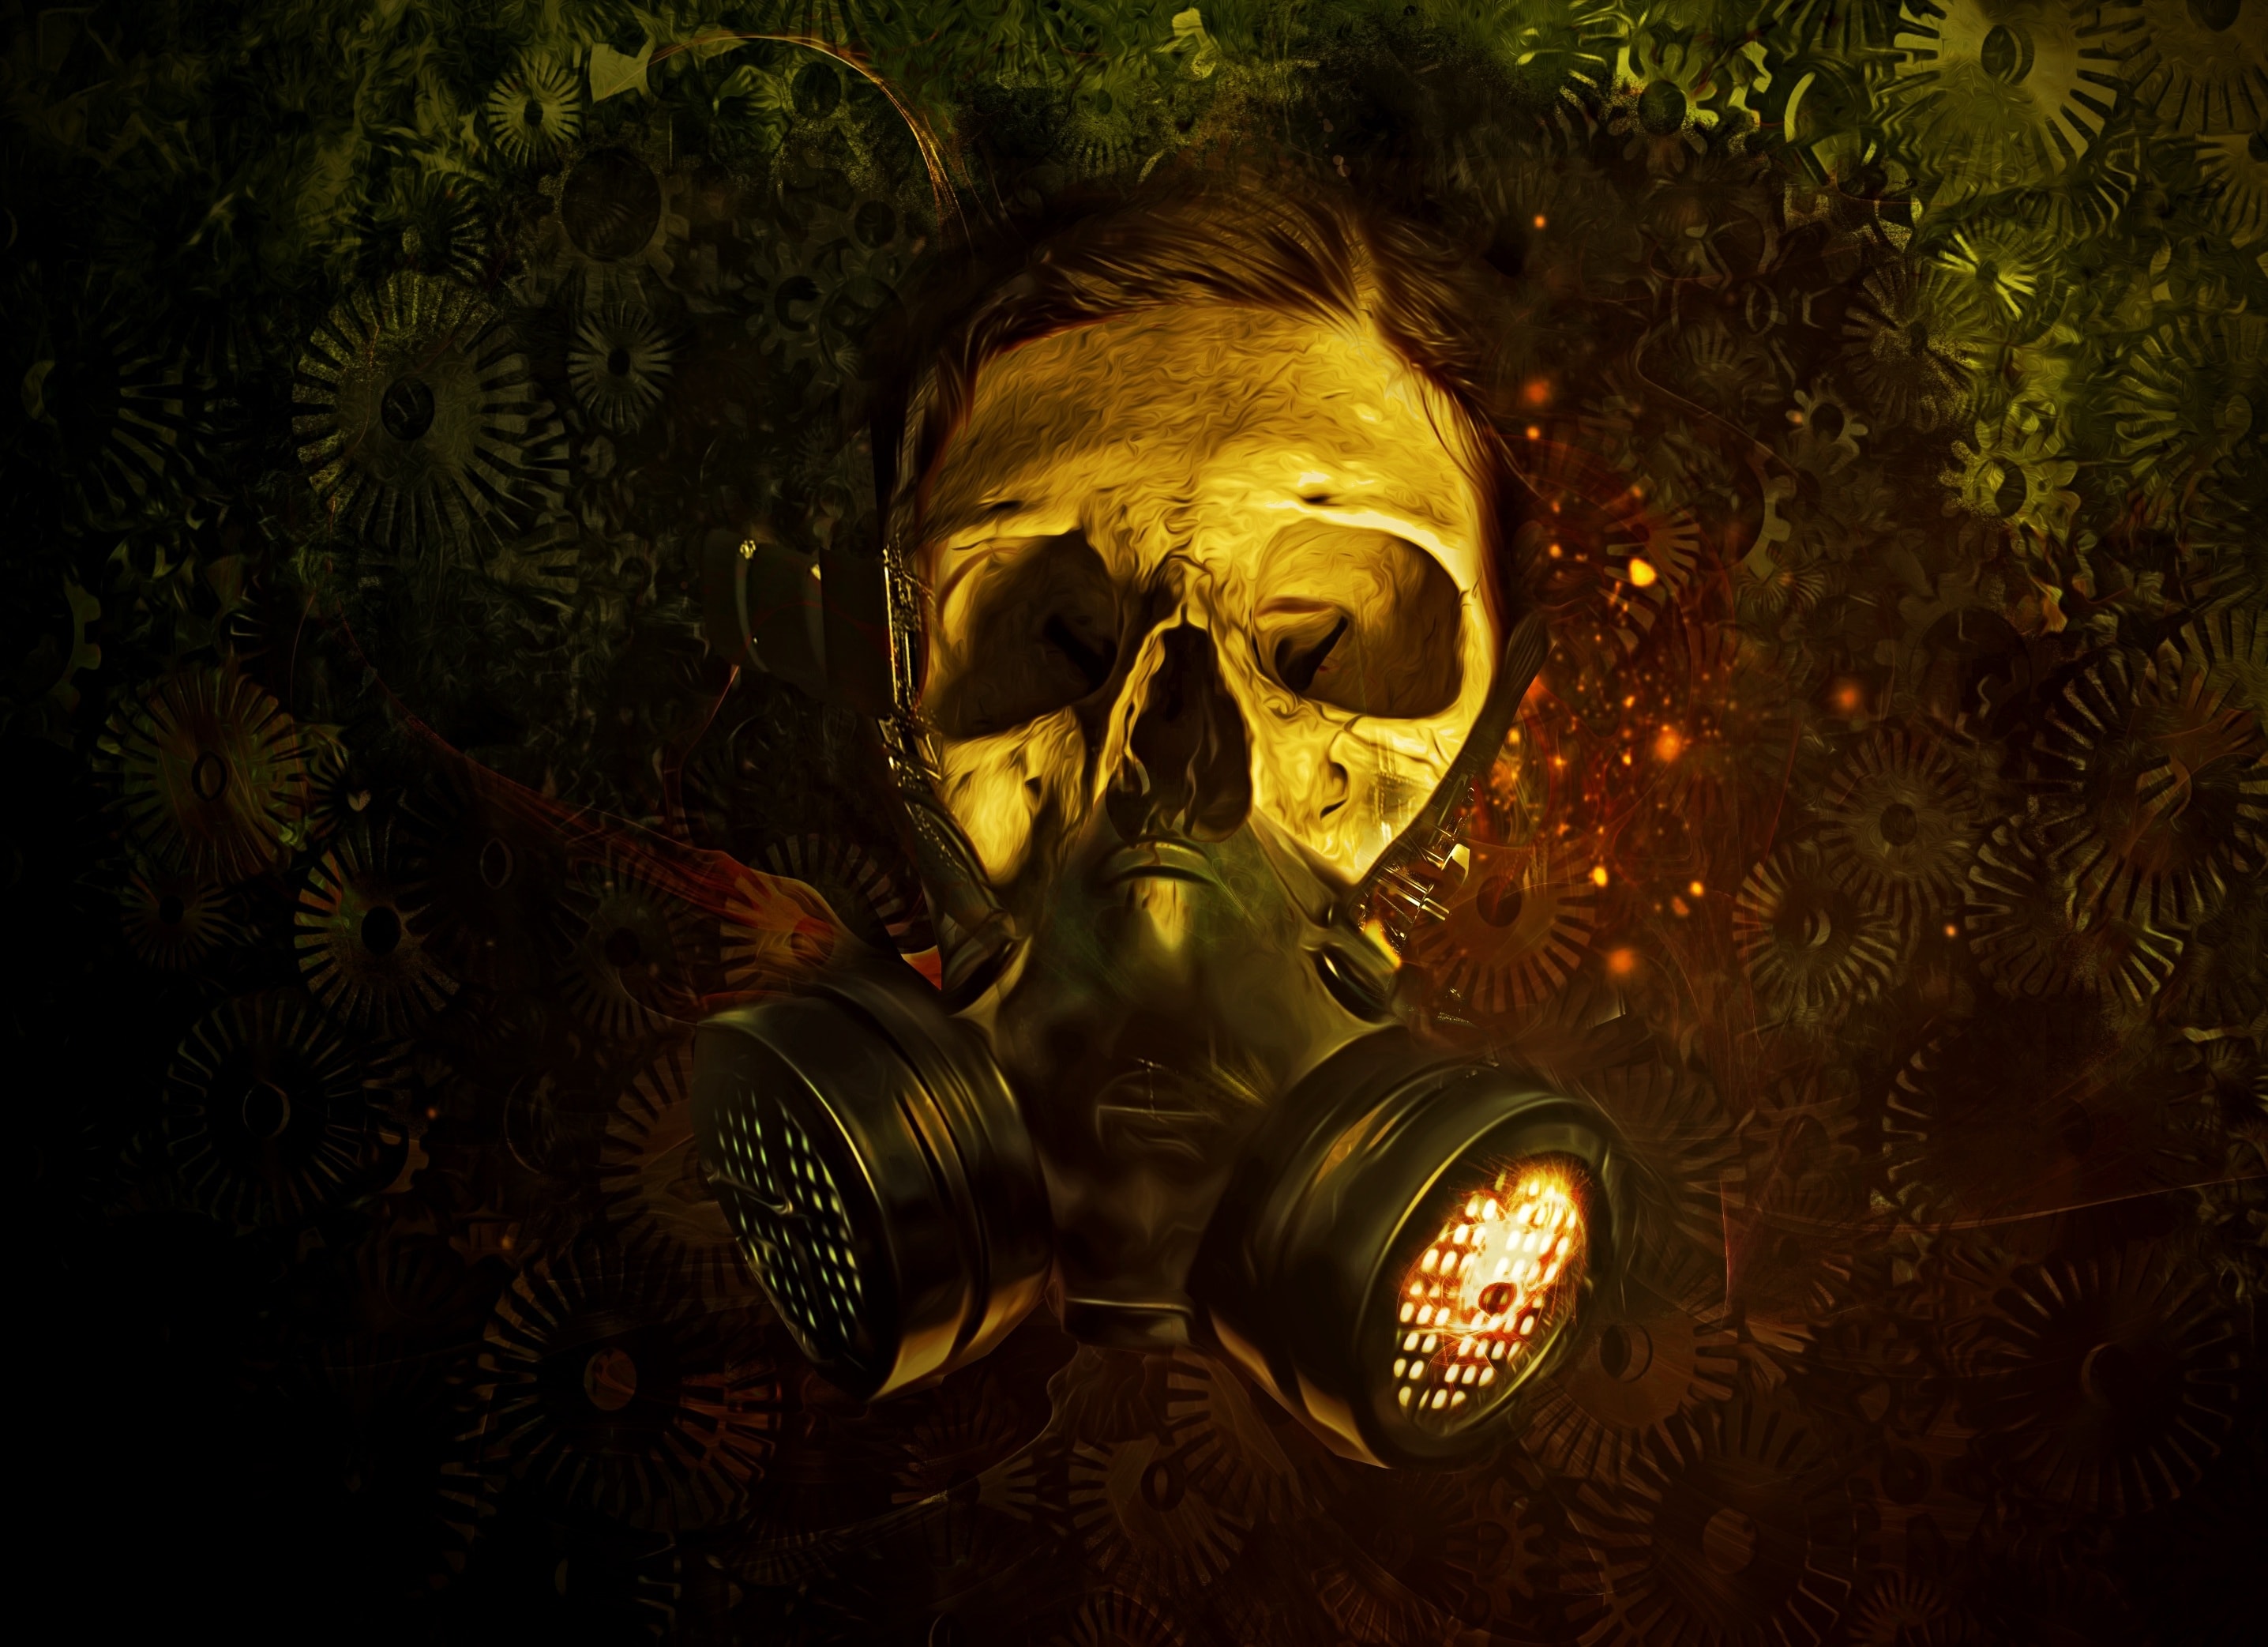 gas mask wallpaper,gas mask,mask,personal protective equipment,costume,headgear